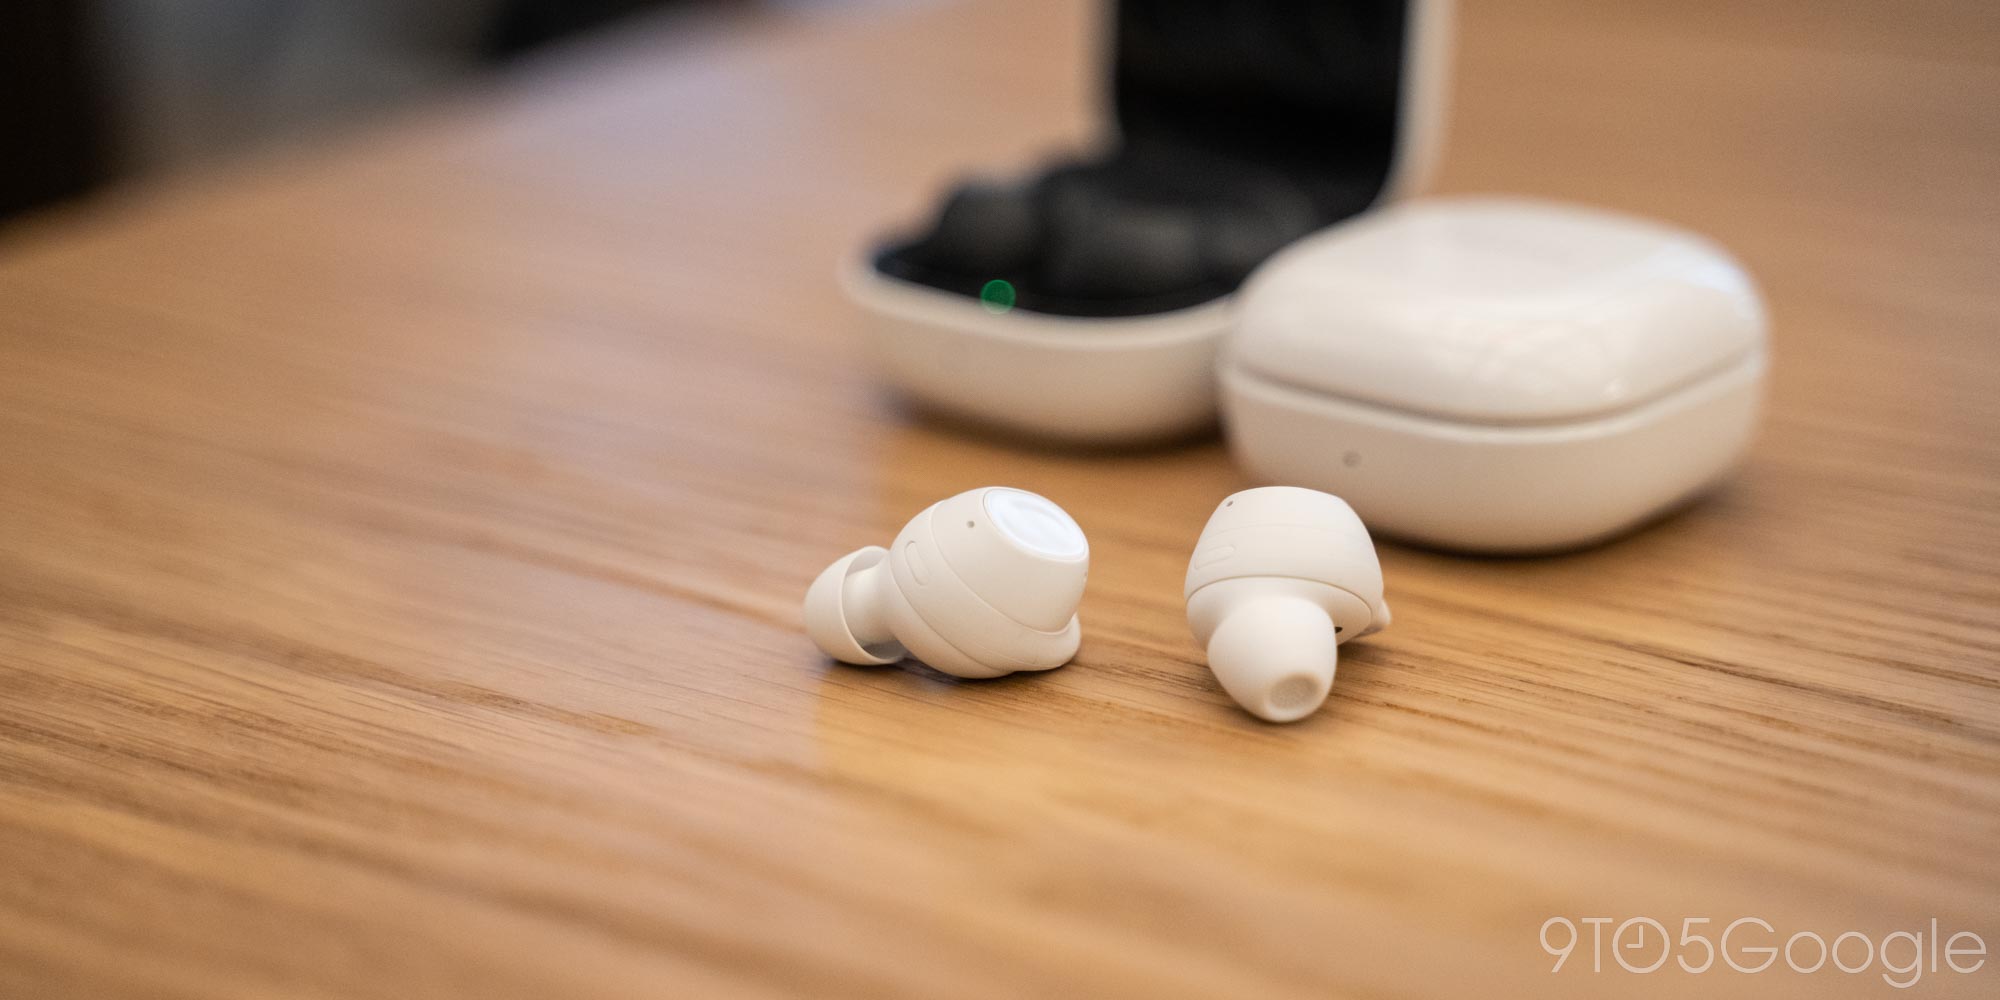 Samsung's new Galaxy Buds FE are even more of a steal with first